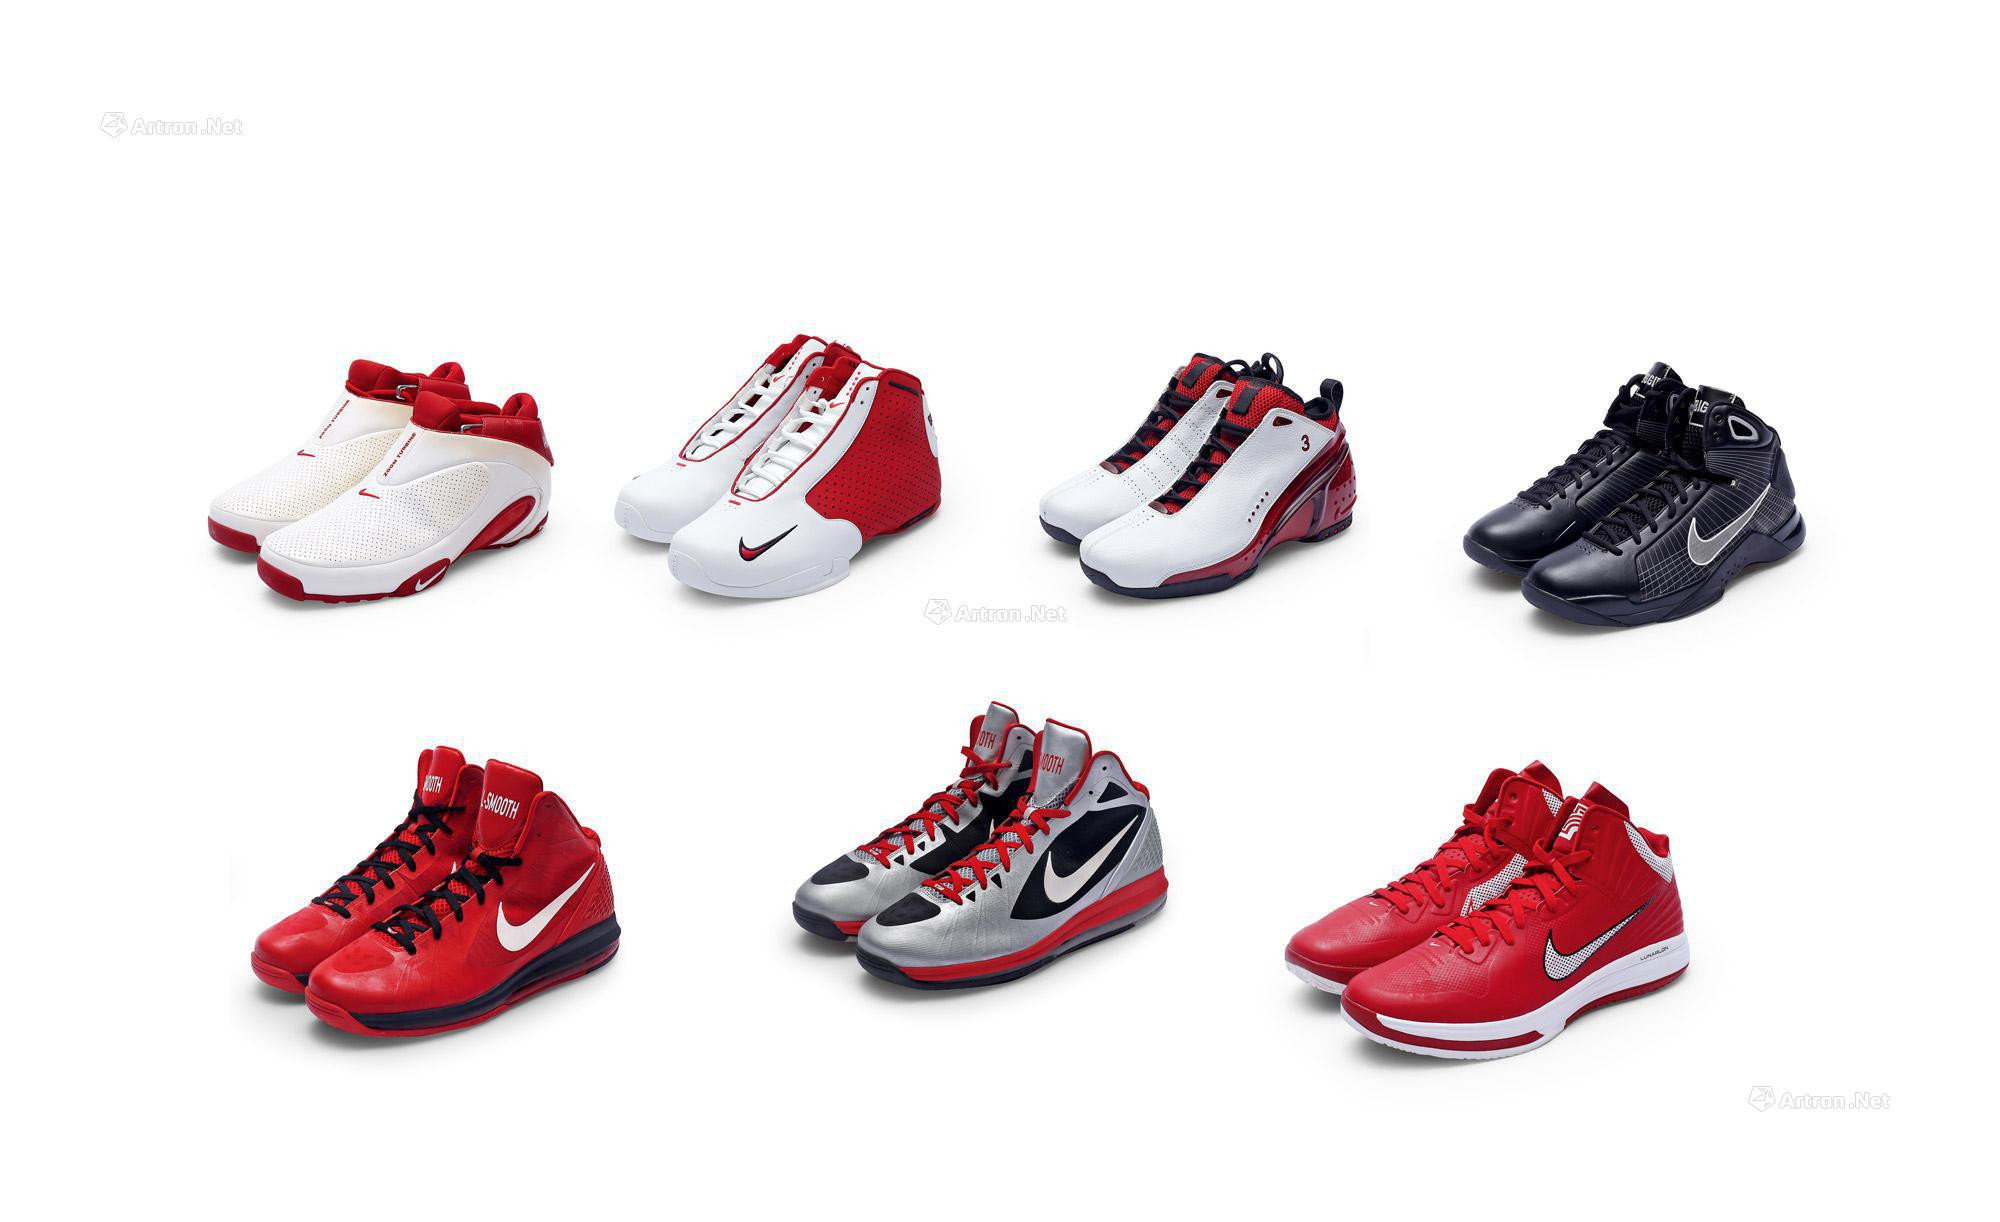 Portland Trail Blazers Exclusive Sneaker Collection  7 Pairs of Exclusive Sneakers